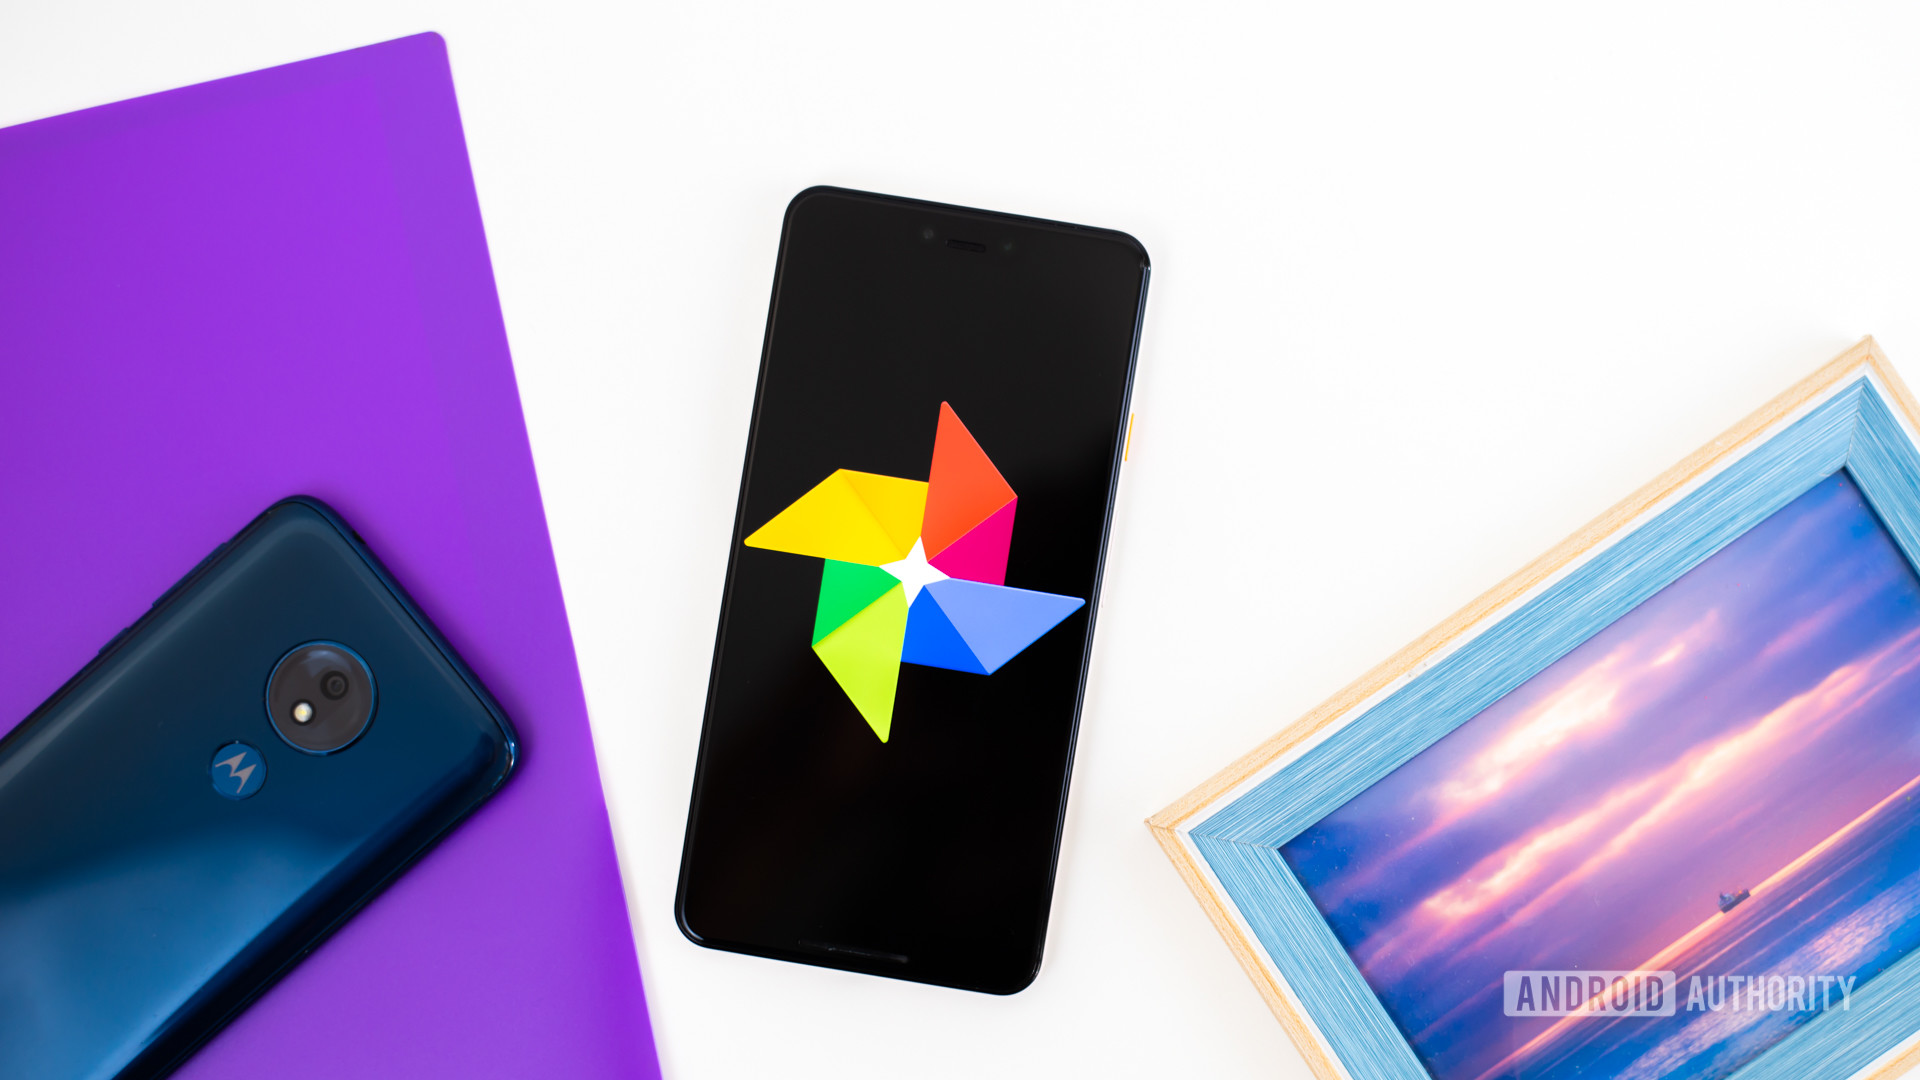 Google Photos logo on smartphone next to imaging accessories stock photo 1 - Backup your Android phone